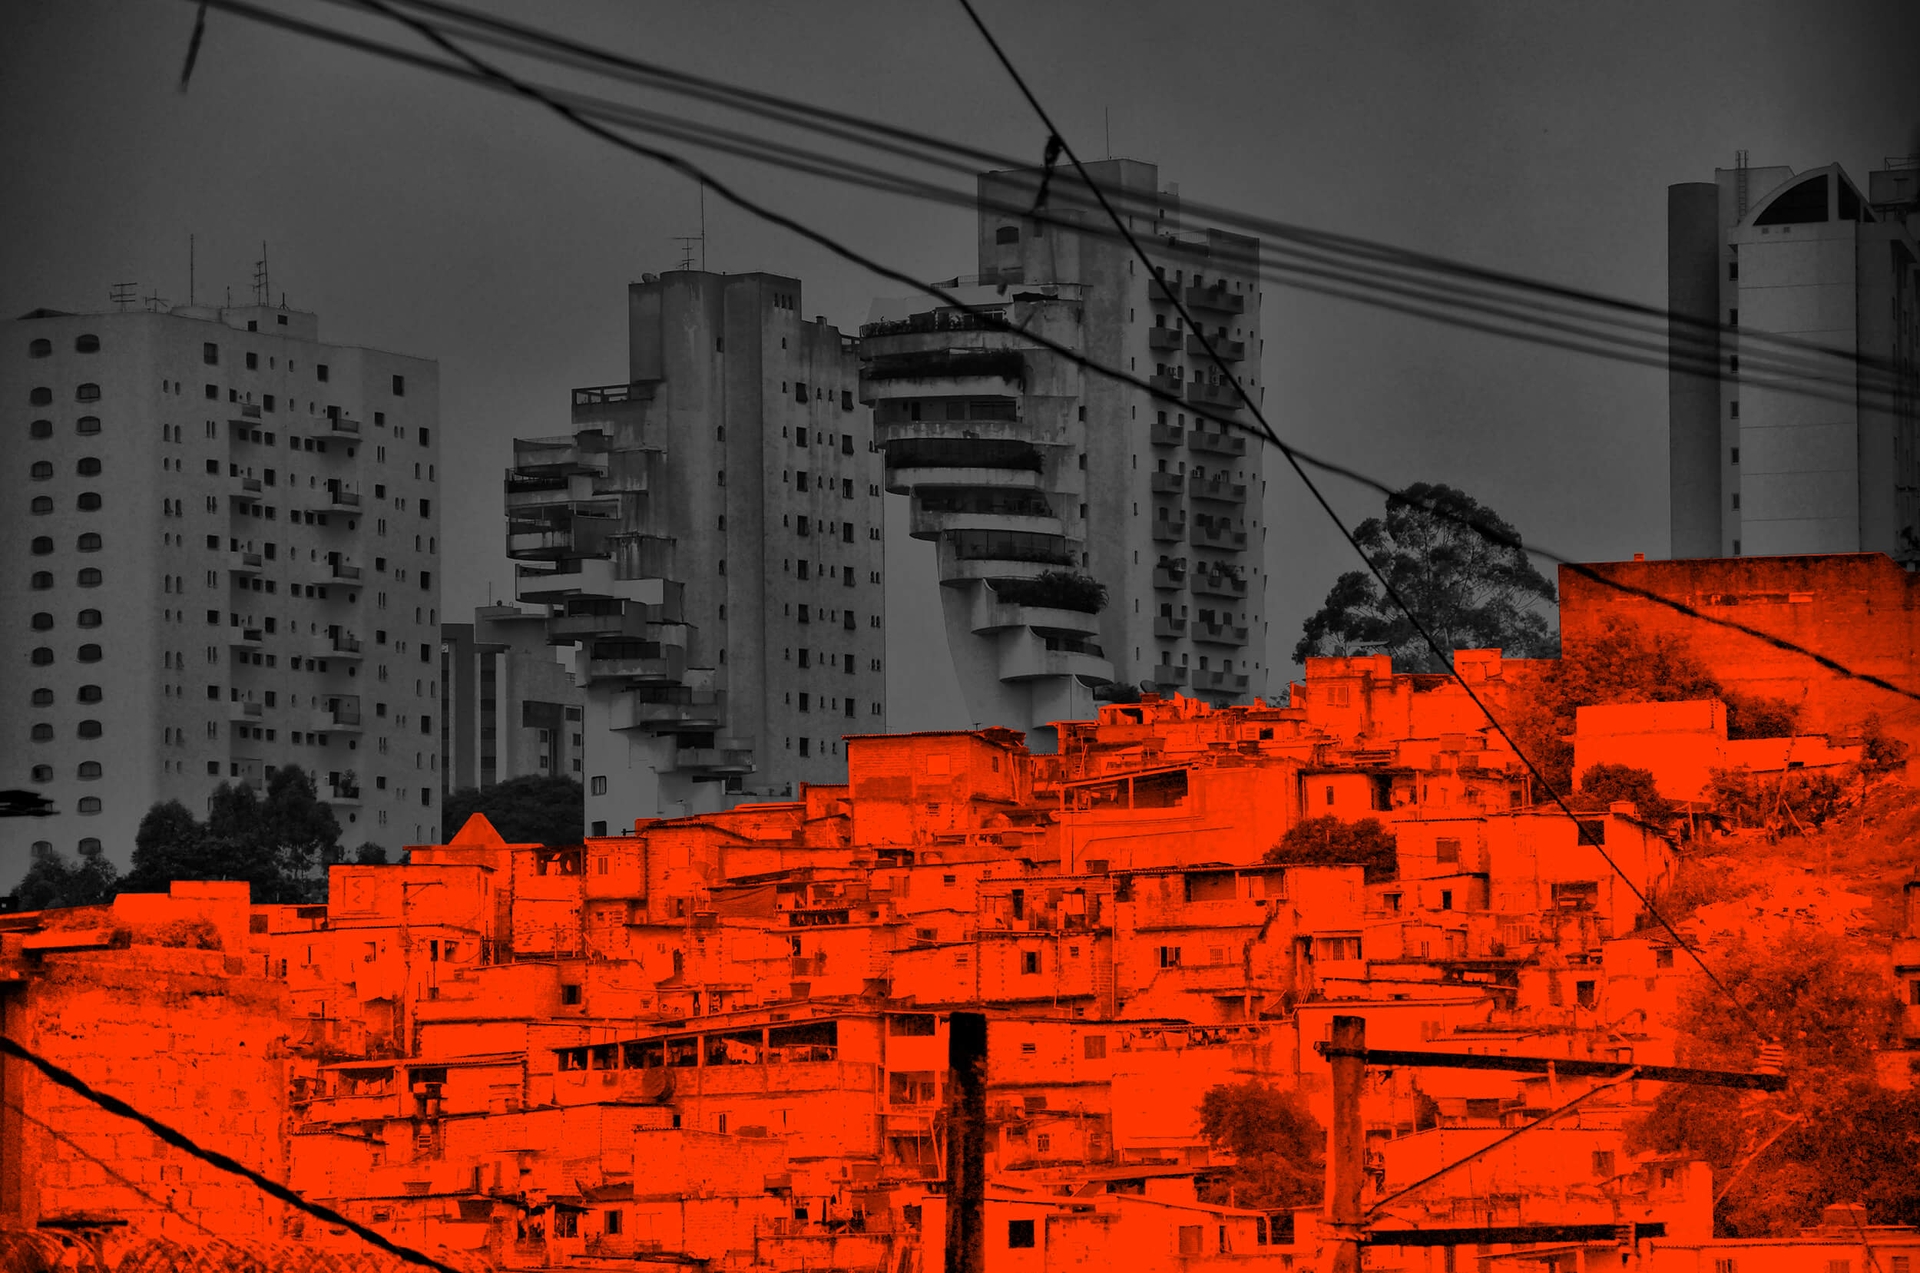 The towers of Morumbi neighbourhood are contrasted with the Paraisópolis favela, symbolizing the gap between rich and poor.